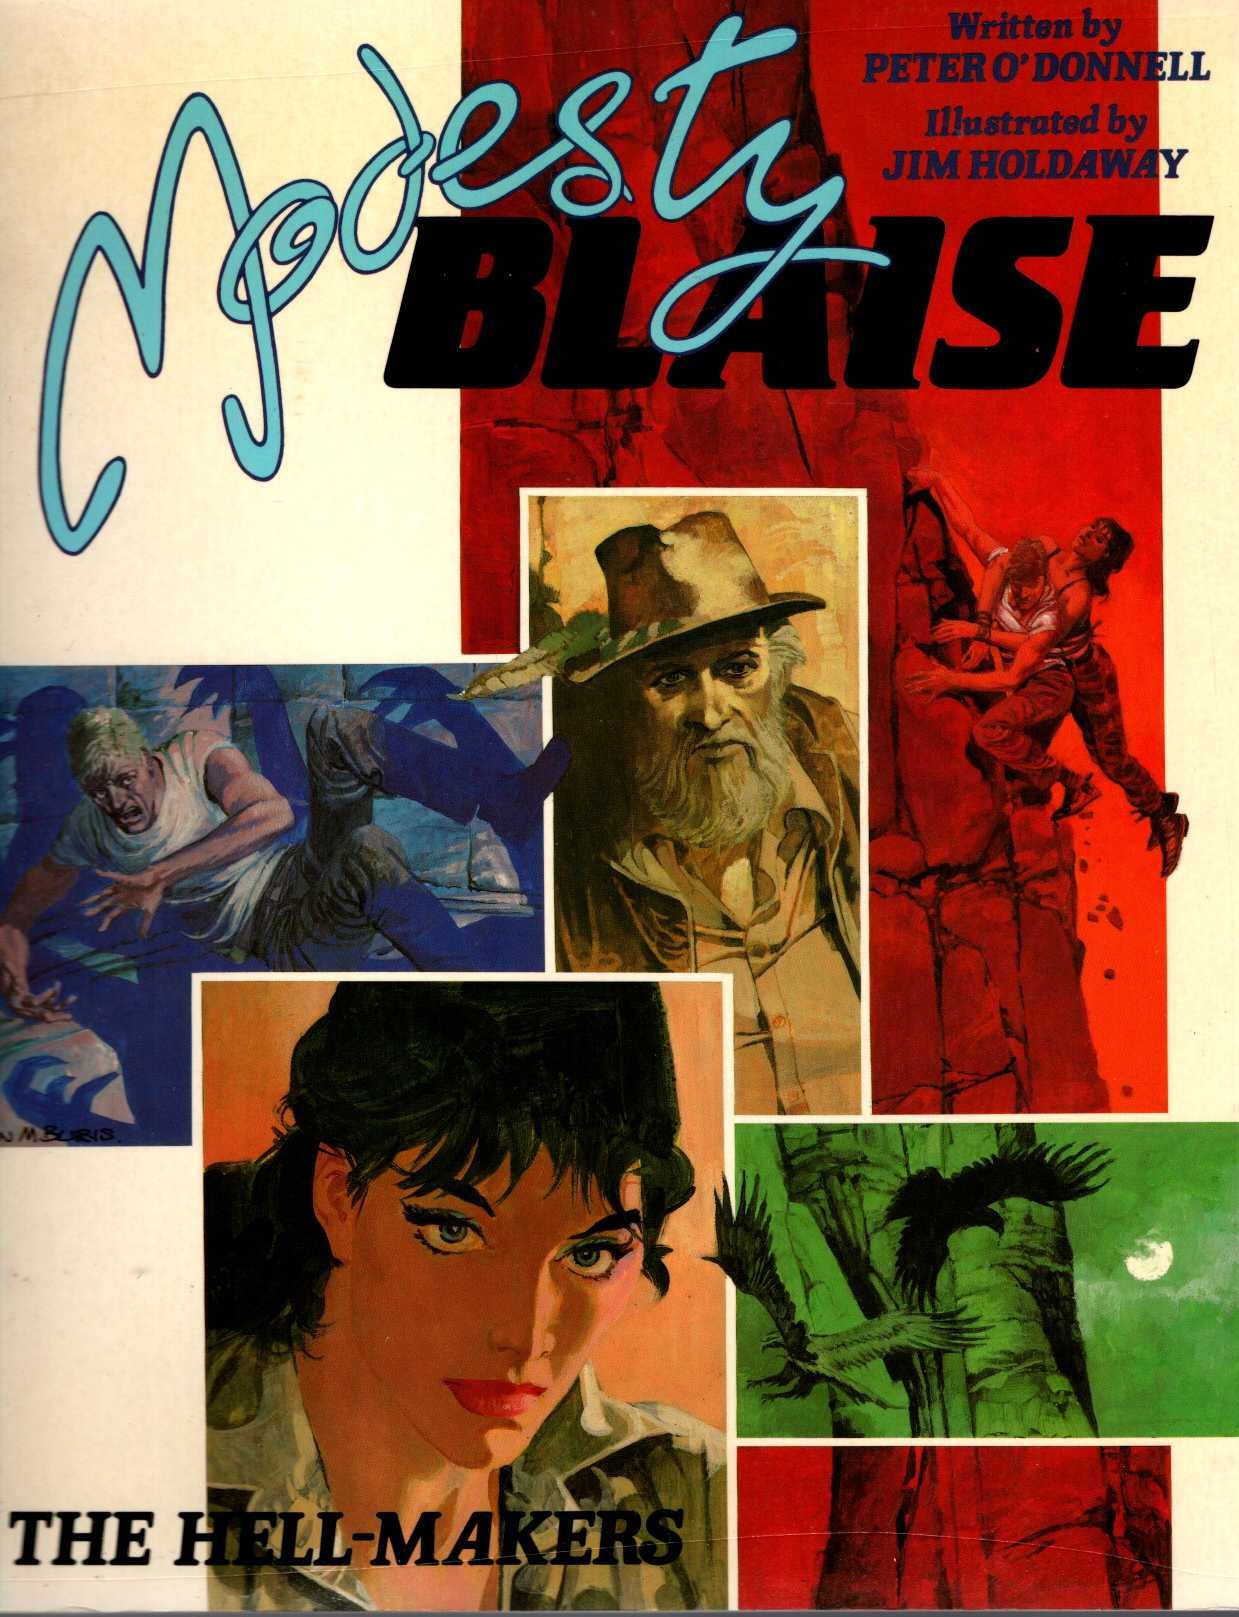 Peter O'Donnell  MODESTY BLAISE: THE HELL-MAKERS front book cover image